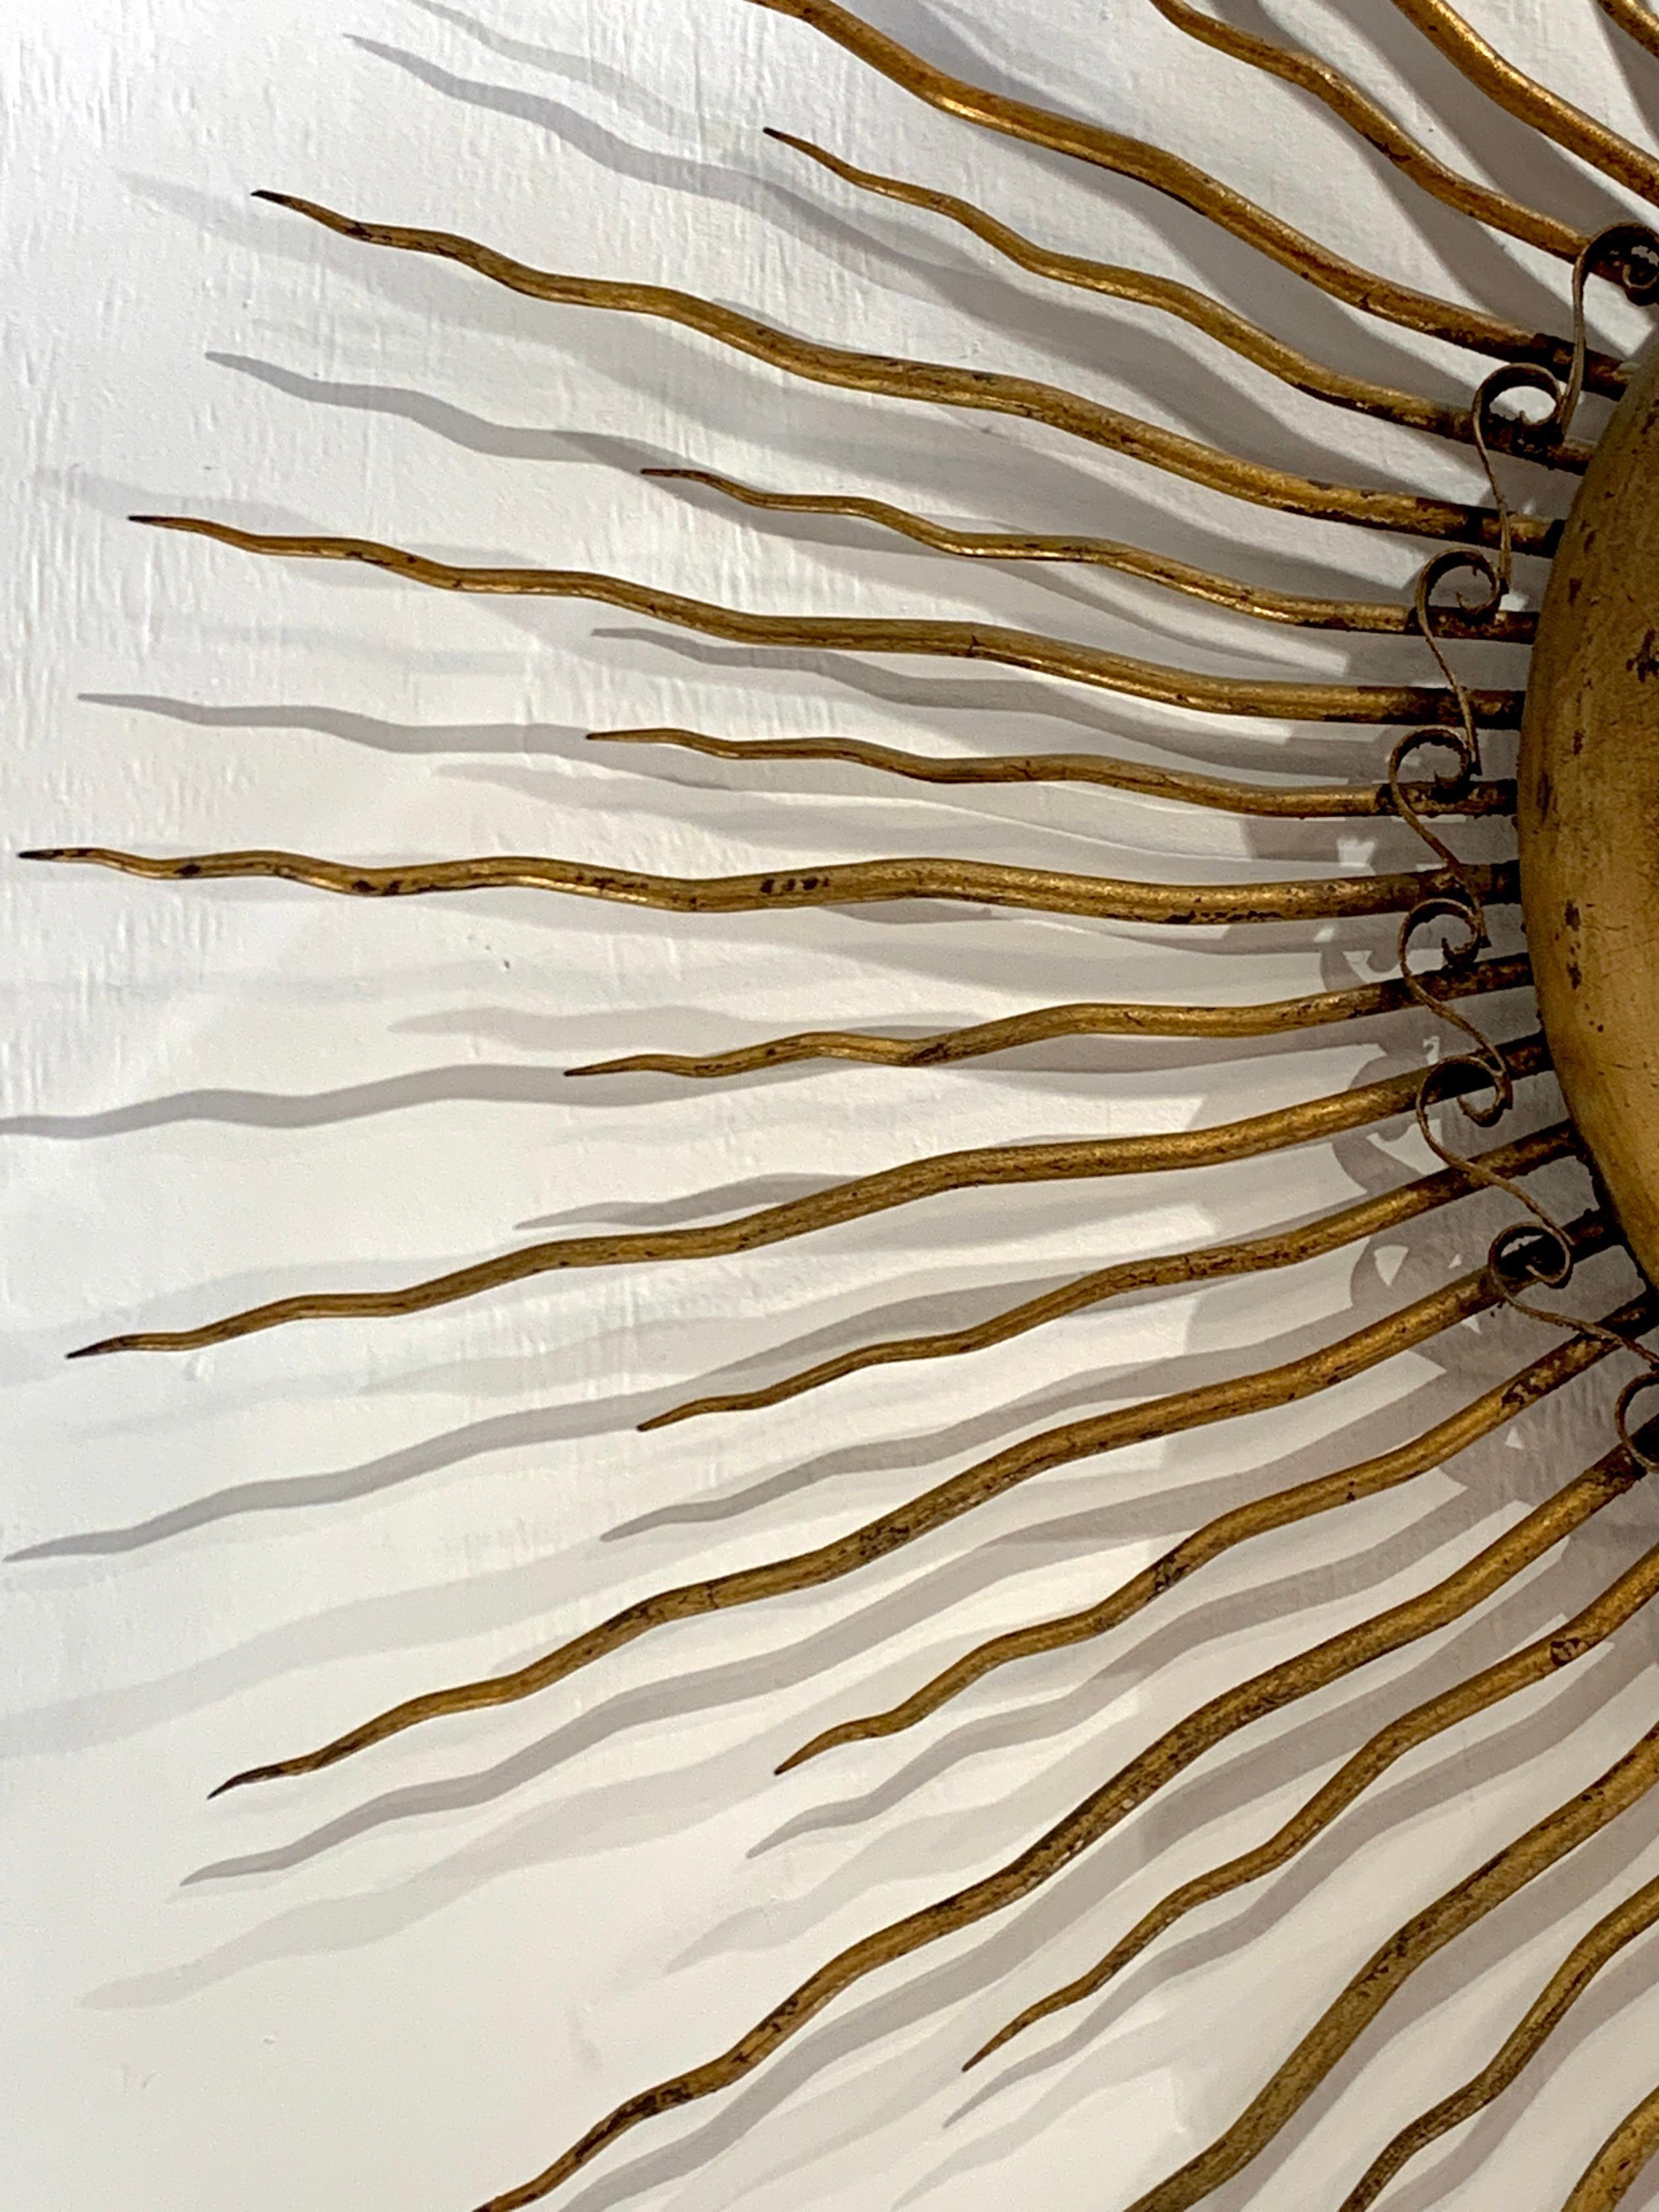 20th Century Antique French Neoclassical Gilt Bronze & Iron Sunburst Wall Sculpture For Sale